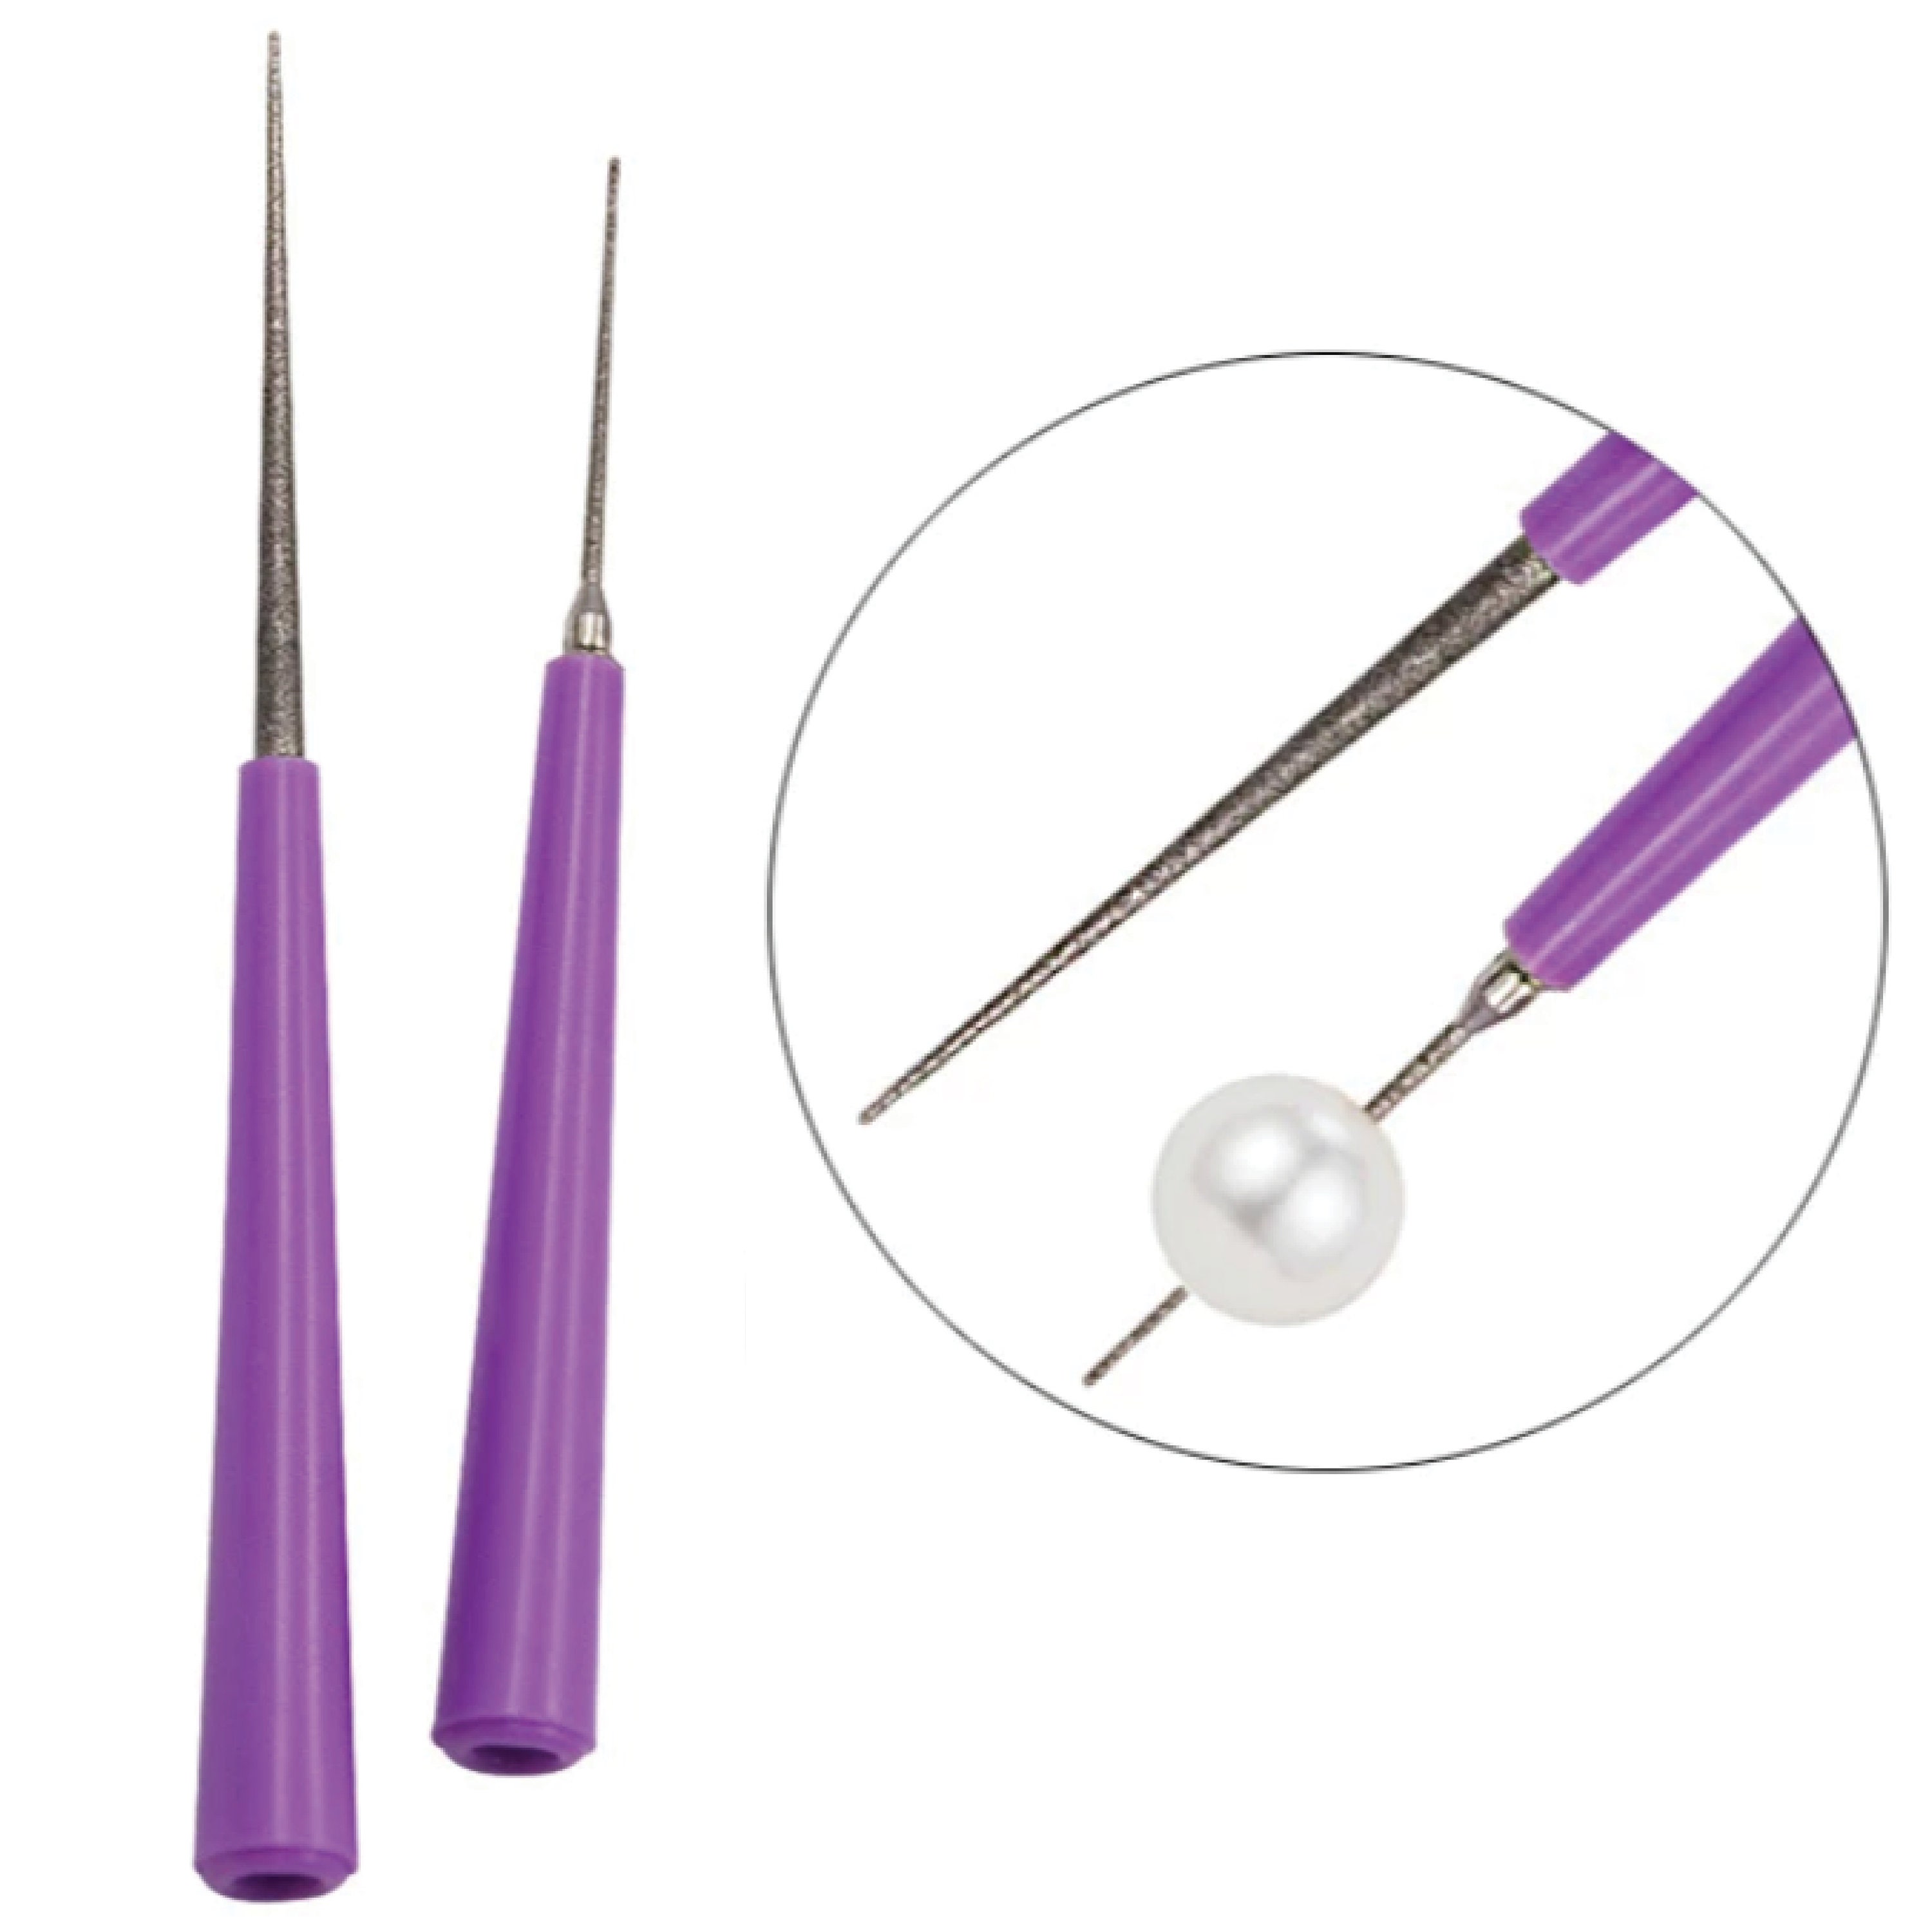 Electric Bead Reamer with 3 Diamond Shaped Tips, Variable Speed Control 24V  BeadSmith Reamer Set, Ideal for Hobby Jewelry, Crafts , Tools